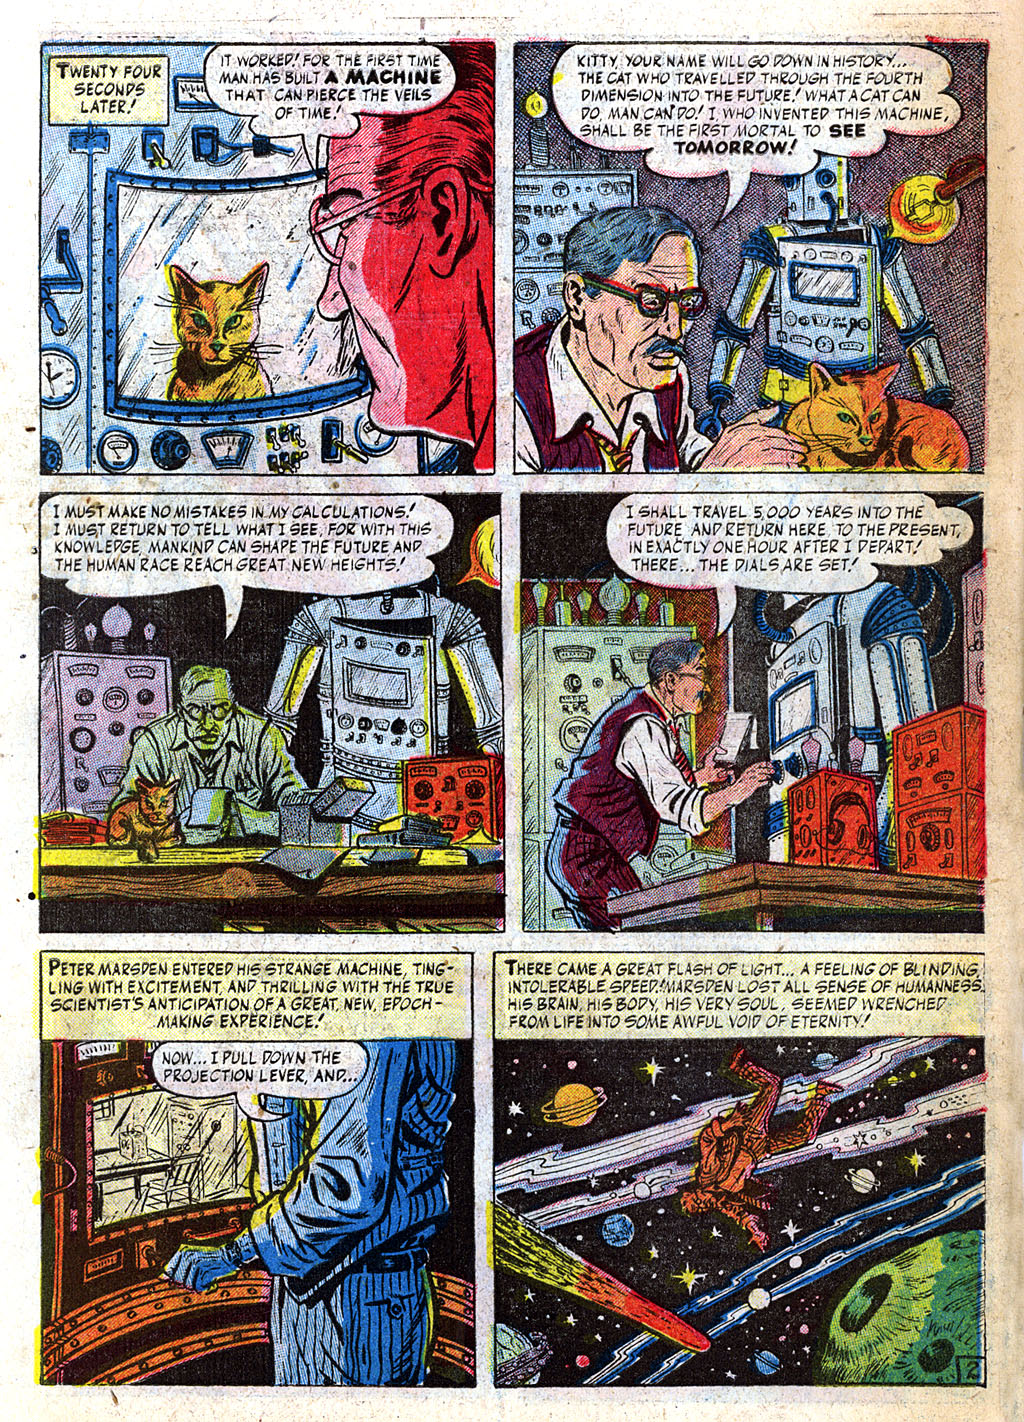 Marvel Tales (1949) 104 Page 29